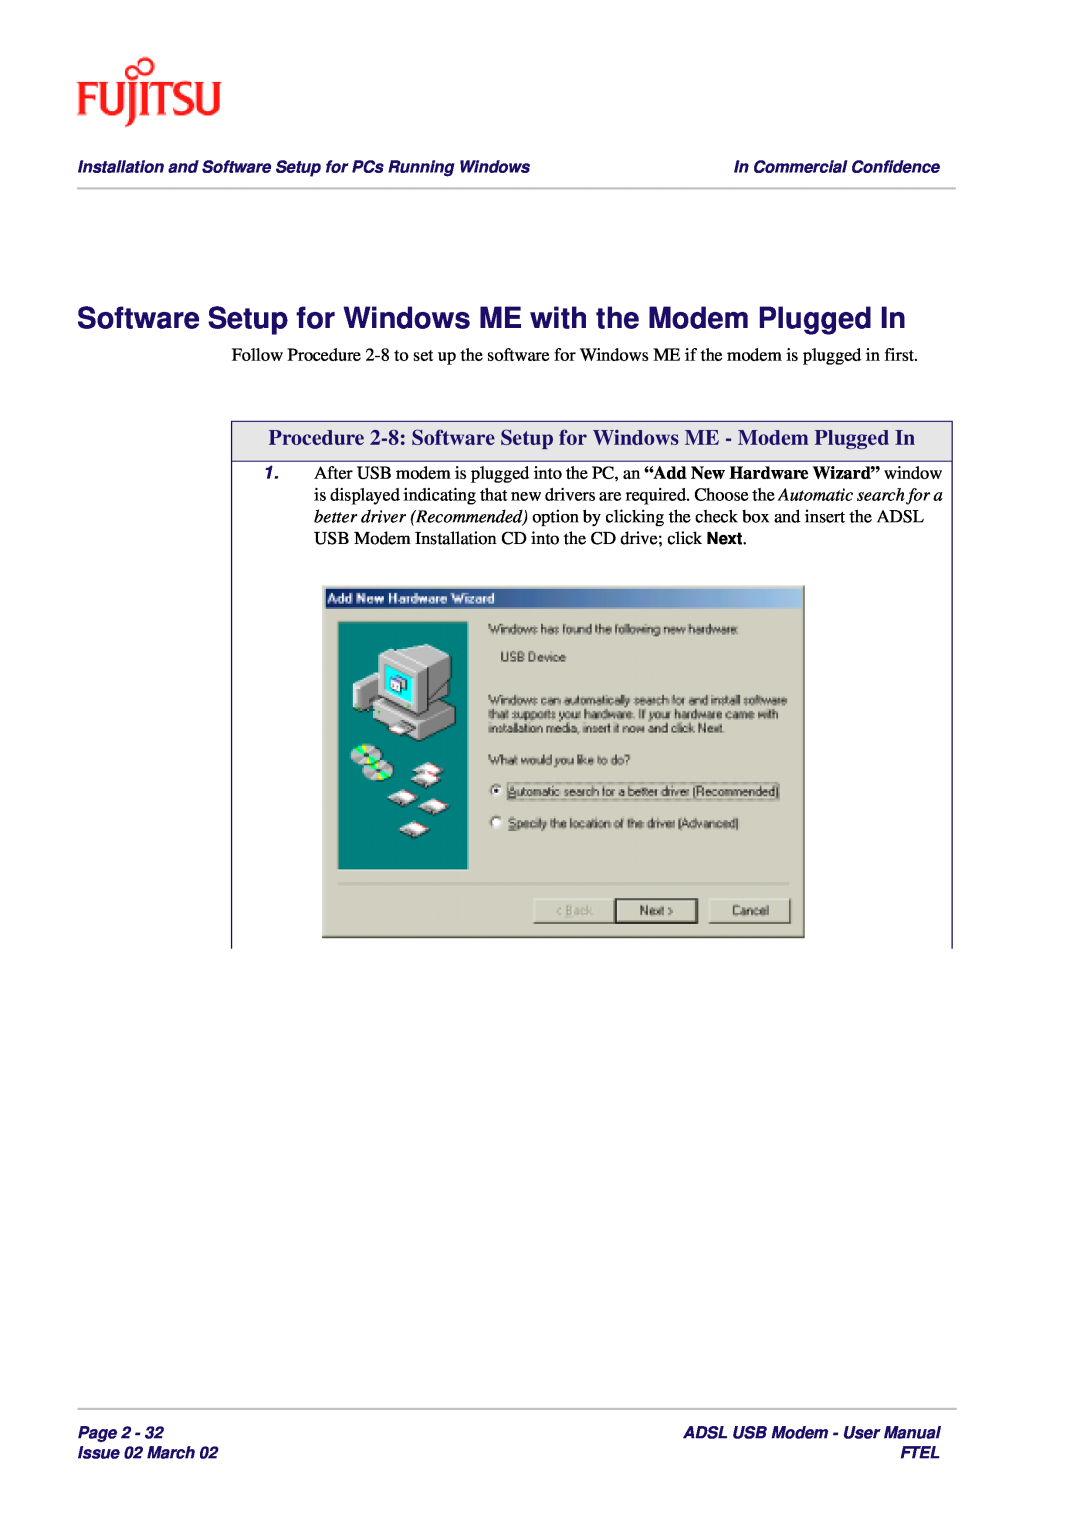 Fujitsu 3XAX-00803AAS user manual Software Setup for Windows ME with the Modem Plugged In 